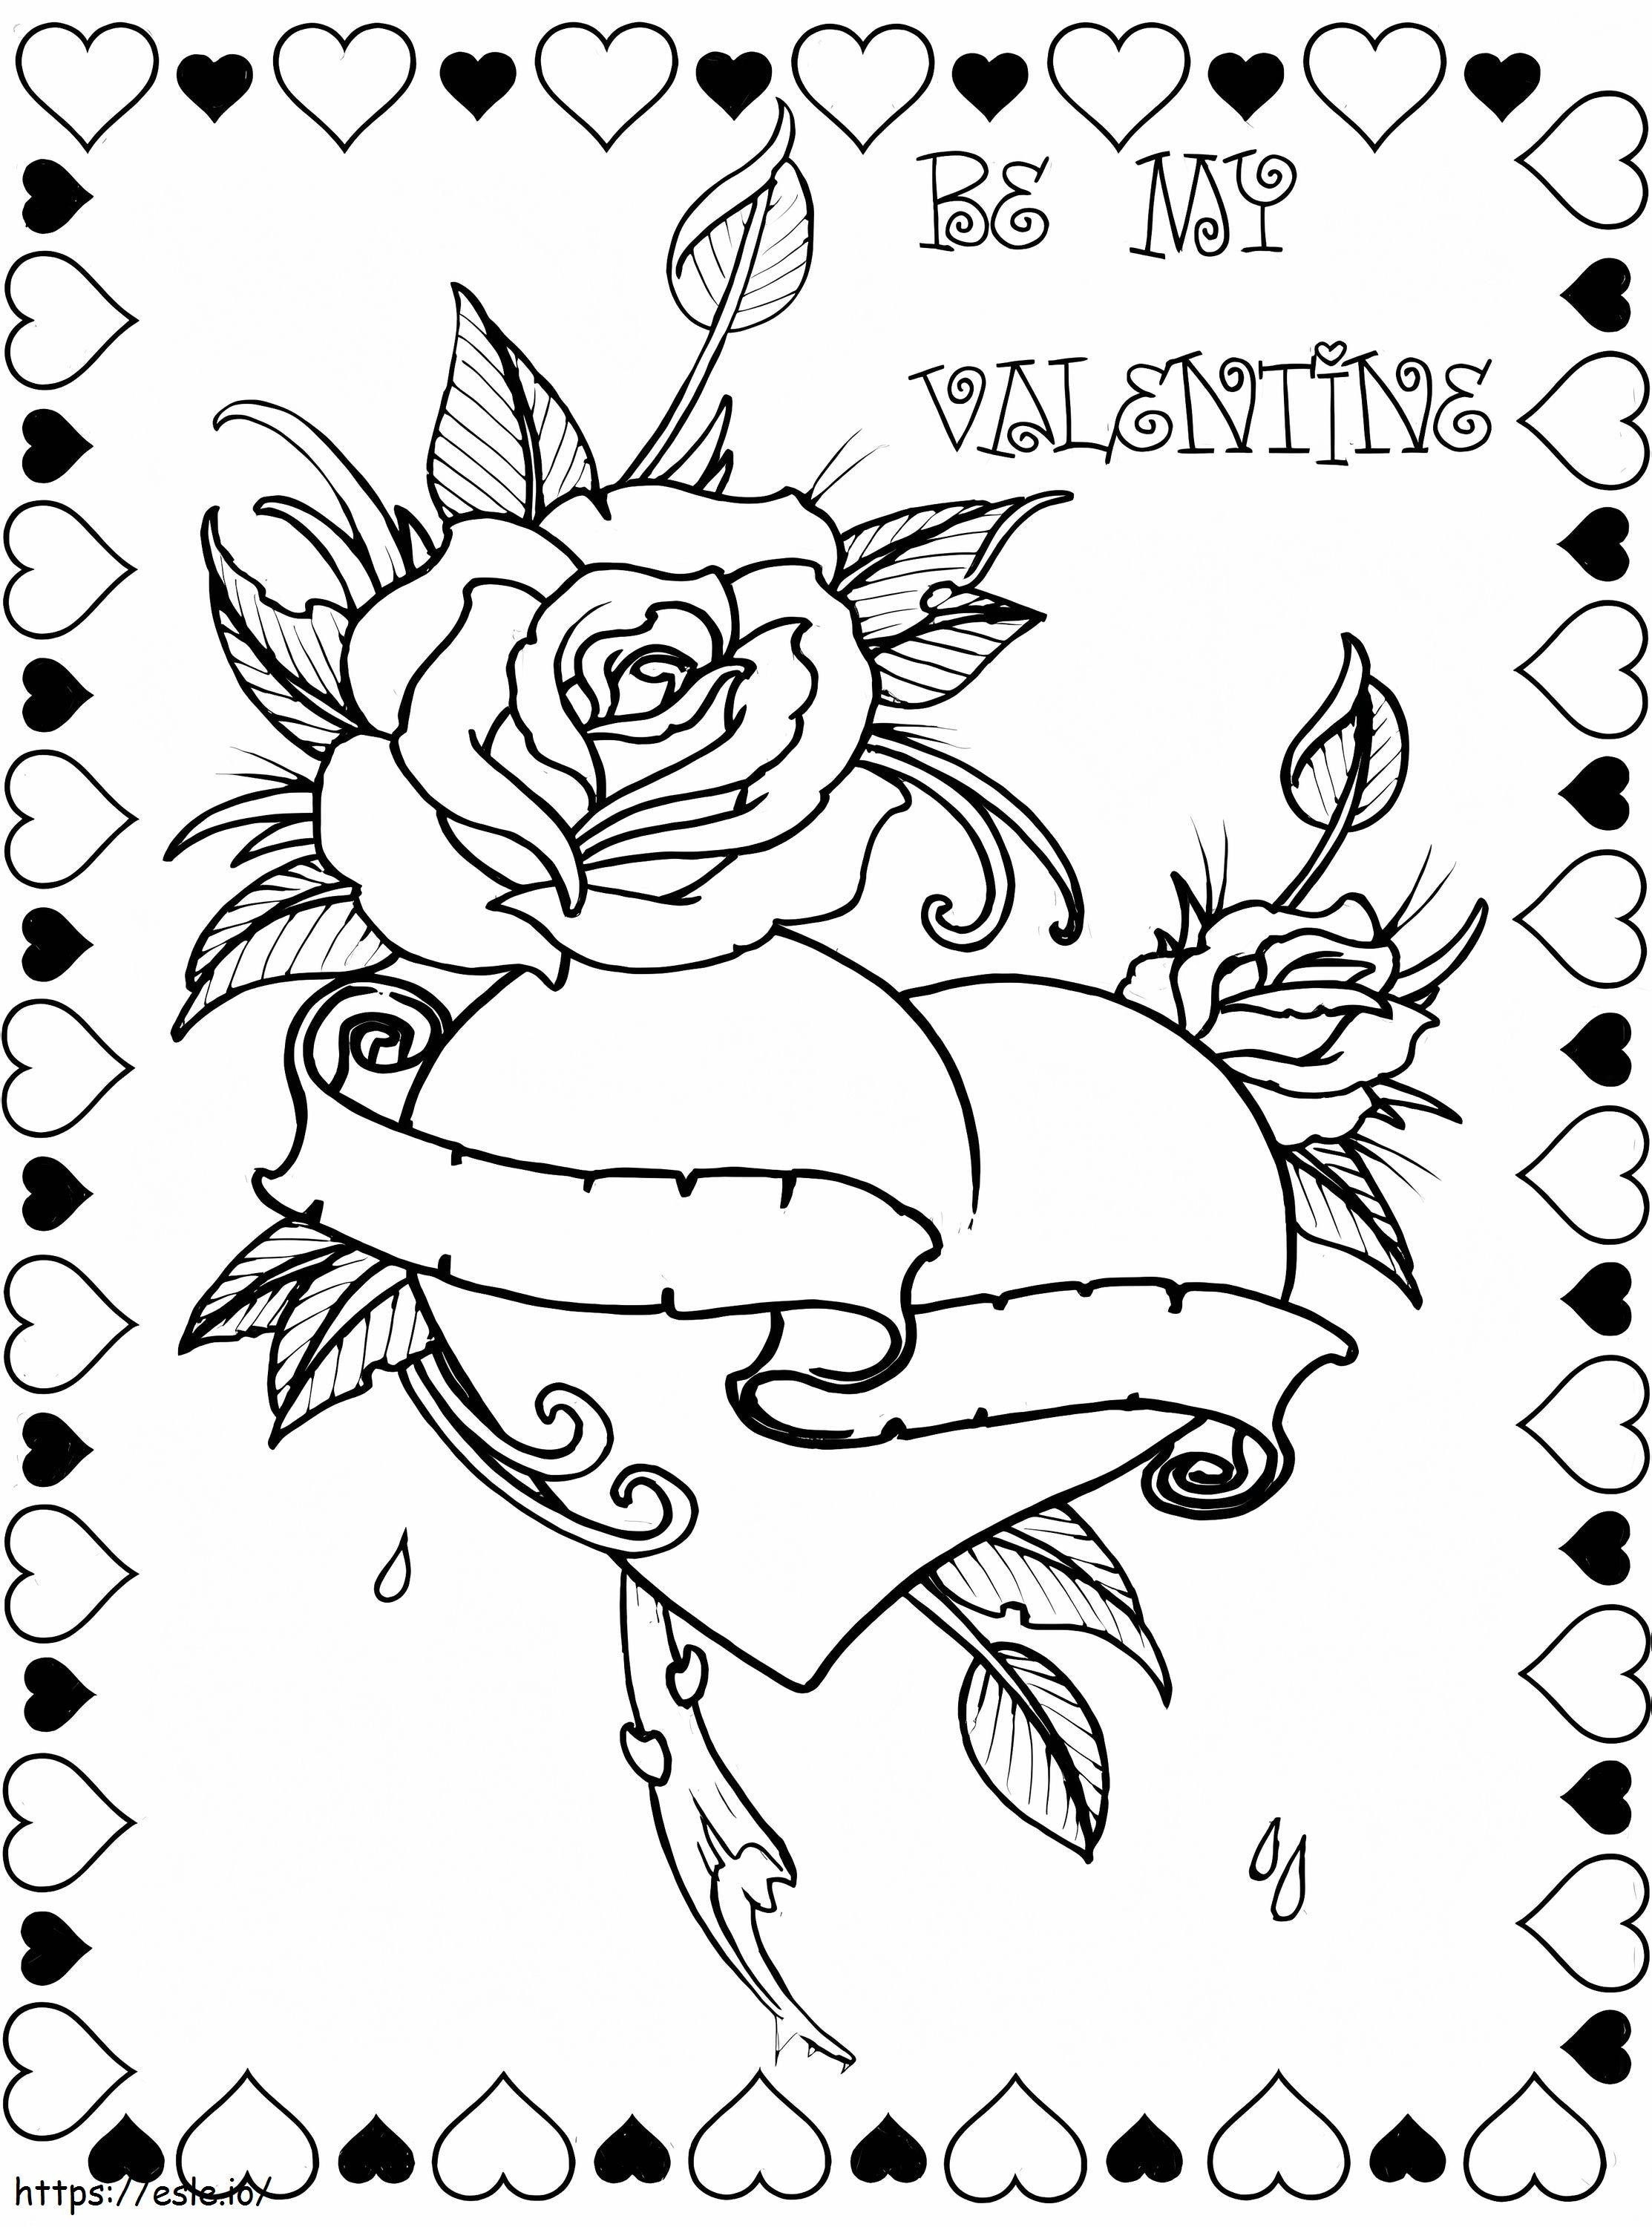 Happy Valentines Day 3 coloring page